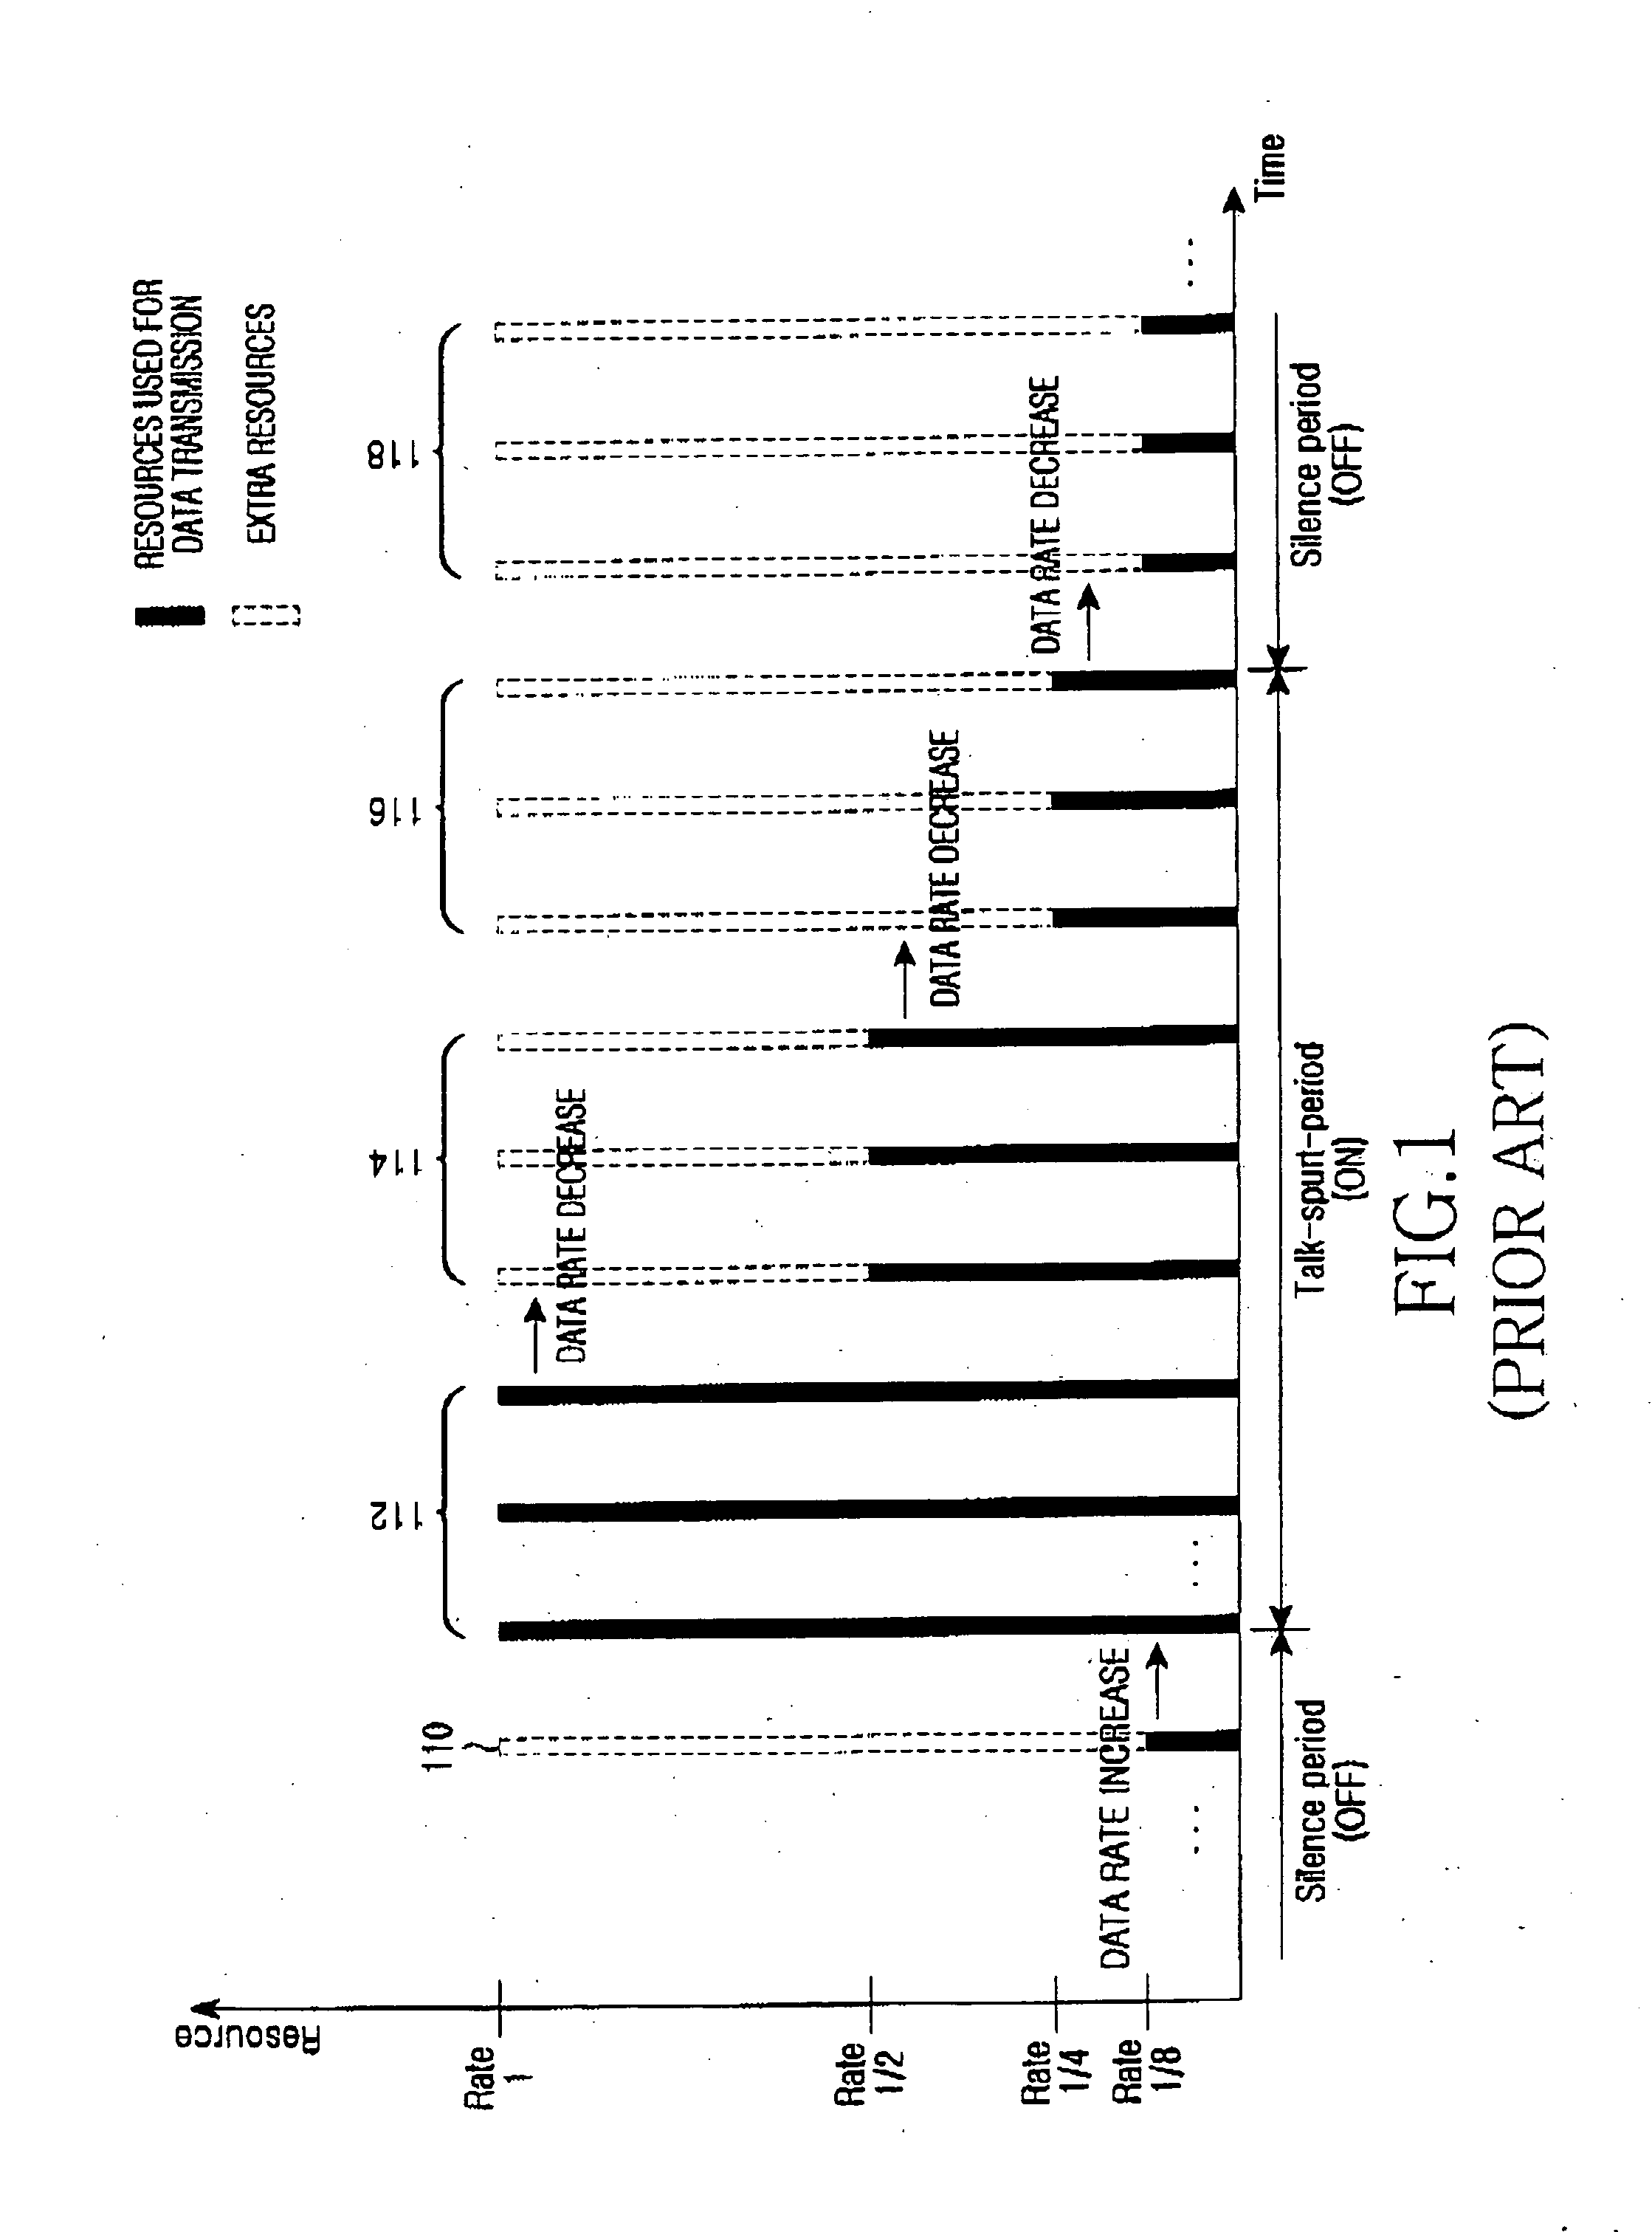 Method of requesting allocation of uplink resources for extended real-time polling service in a wireless communication system